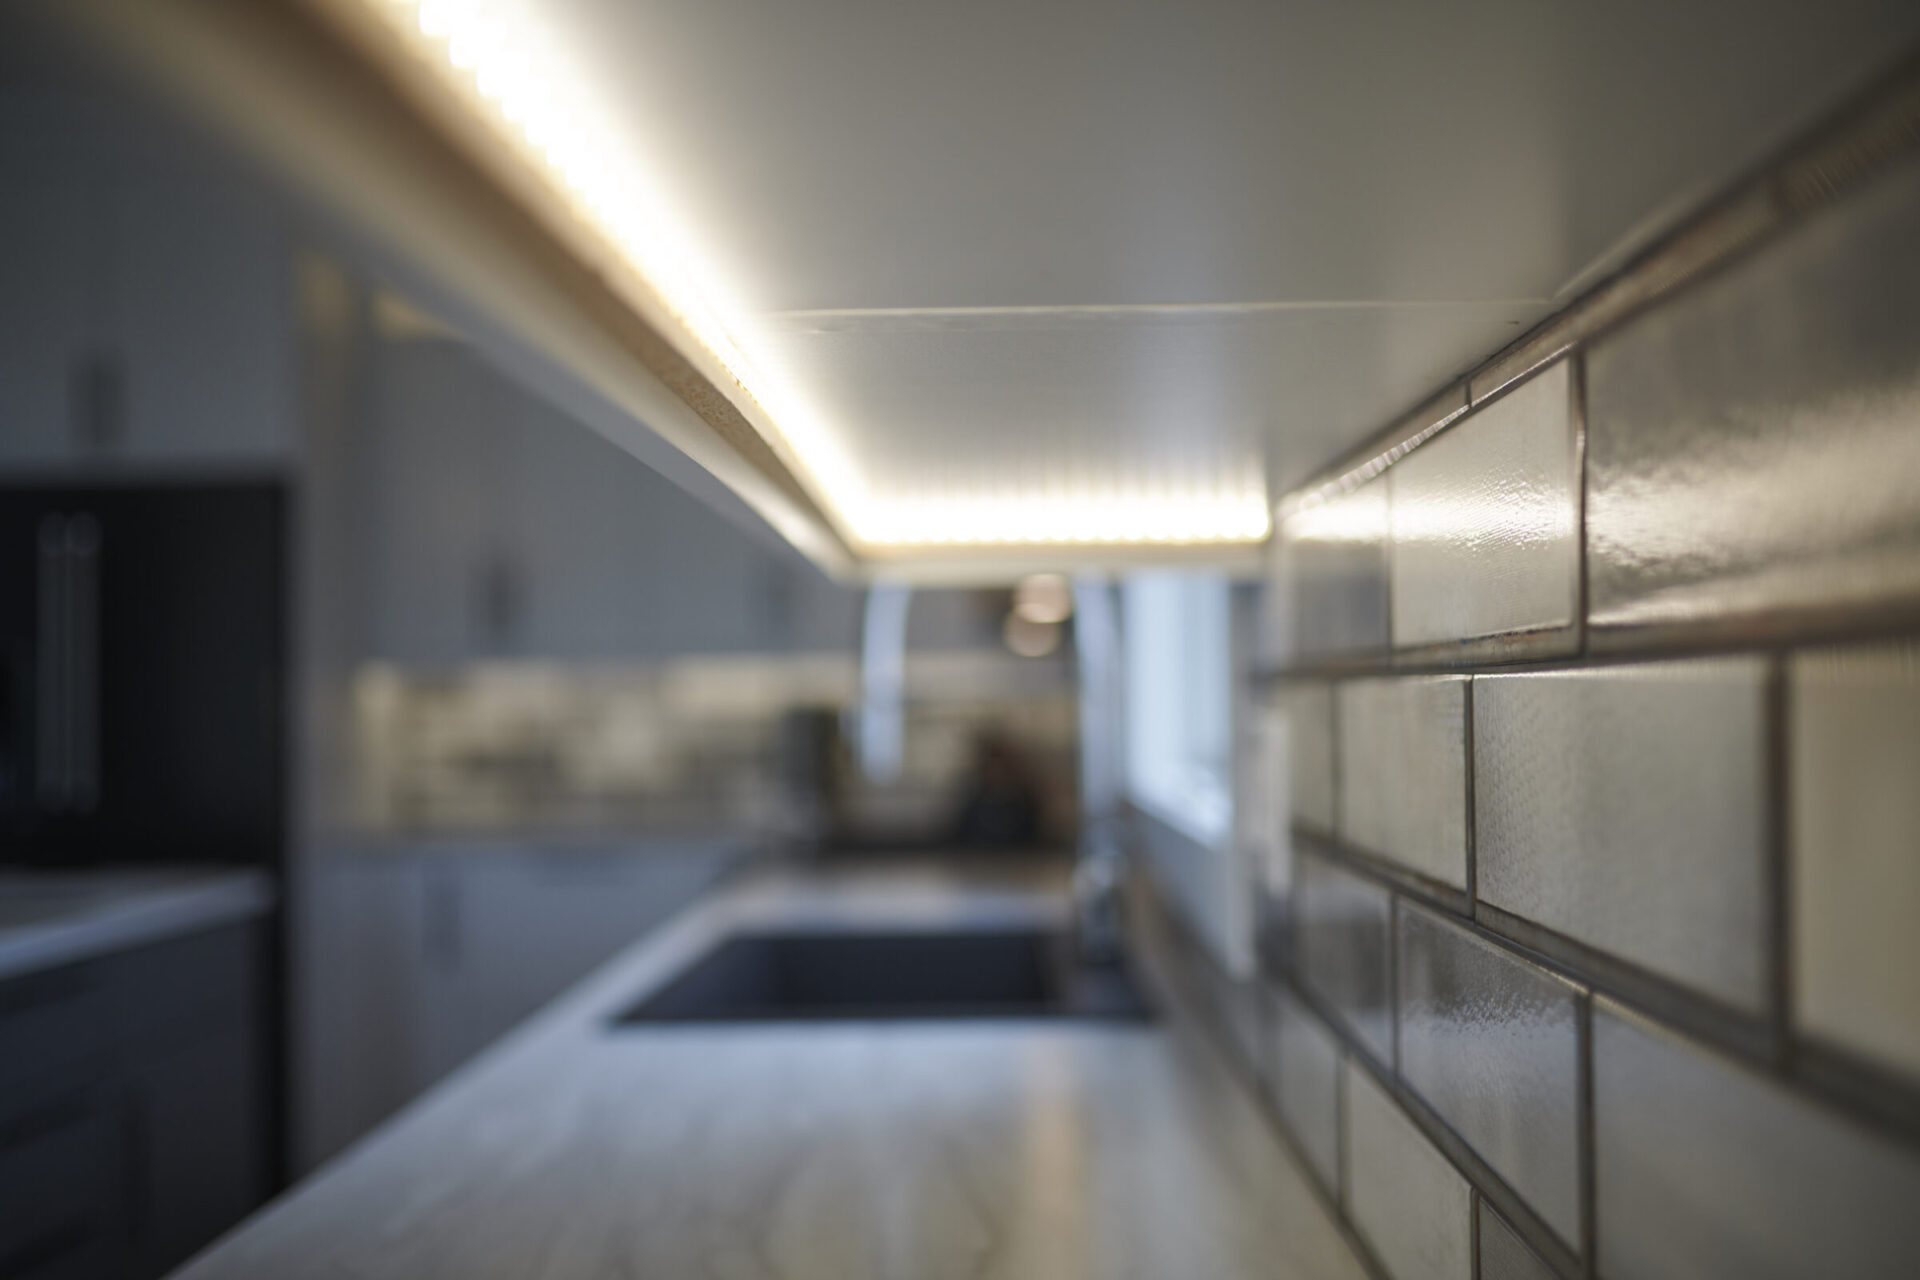 A modern kitchen with LED lighting under cabinets, showcasing a blurred background focused on glossy subway tiles and reflecting a sleek counter.